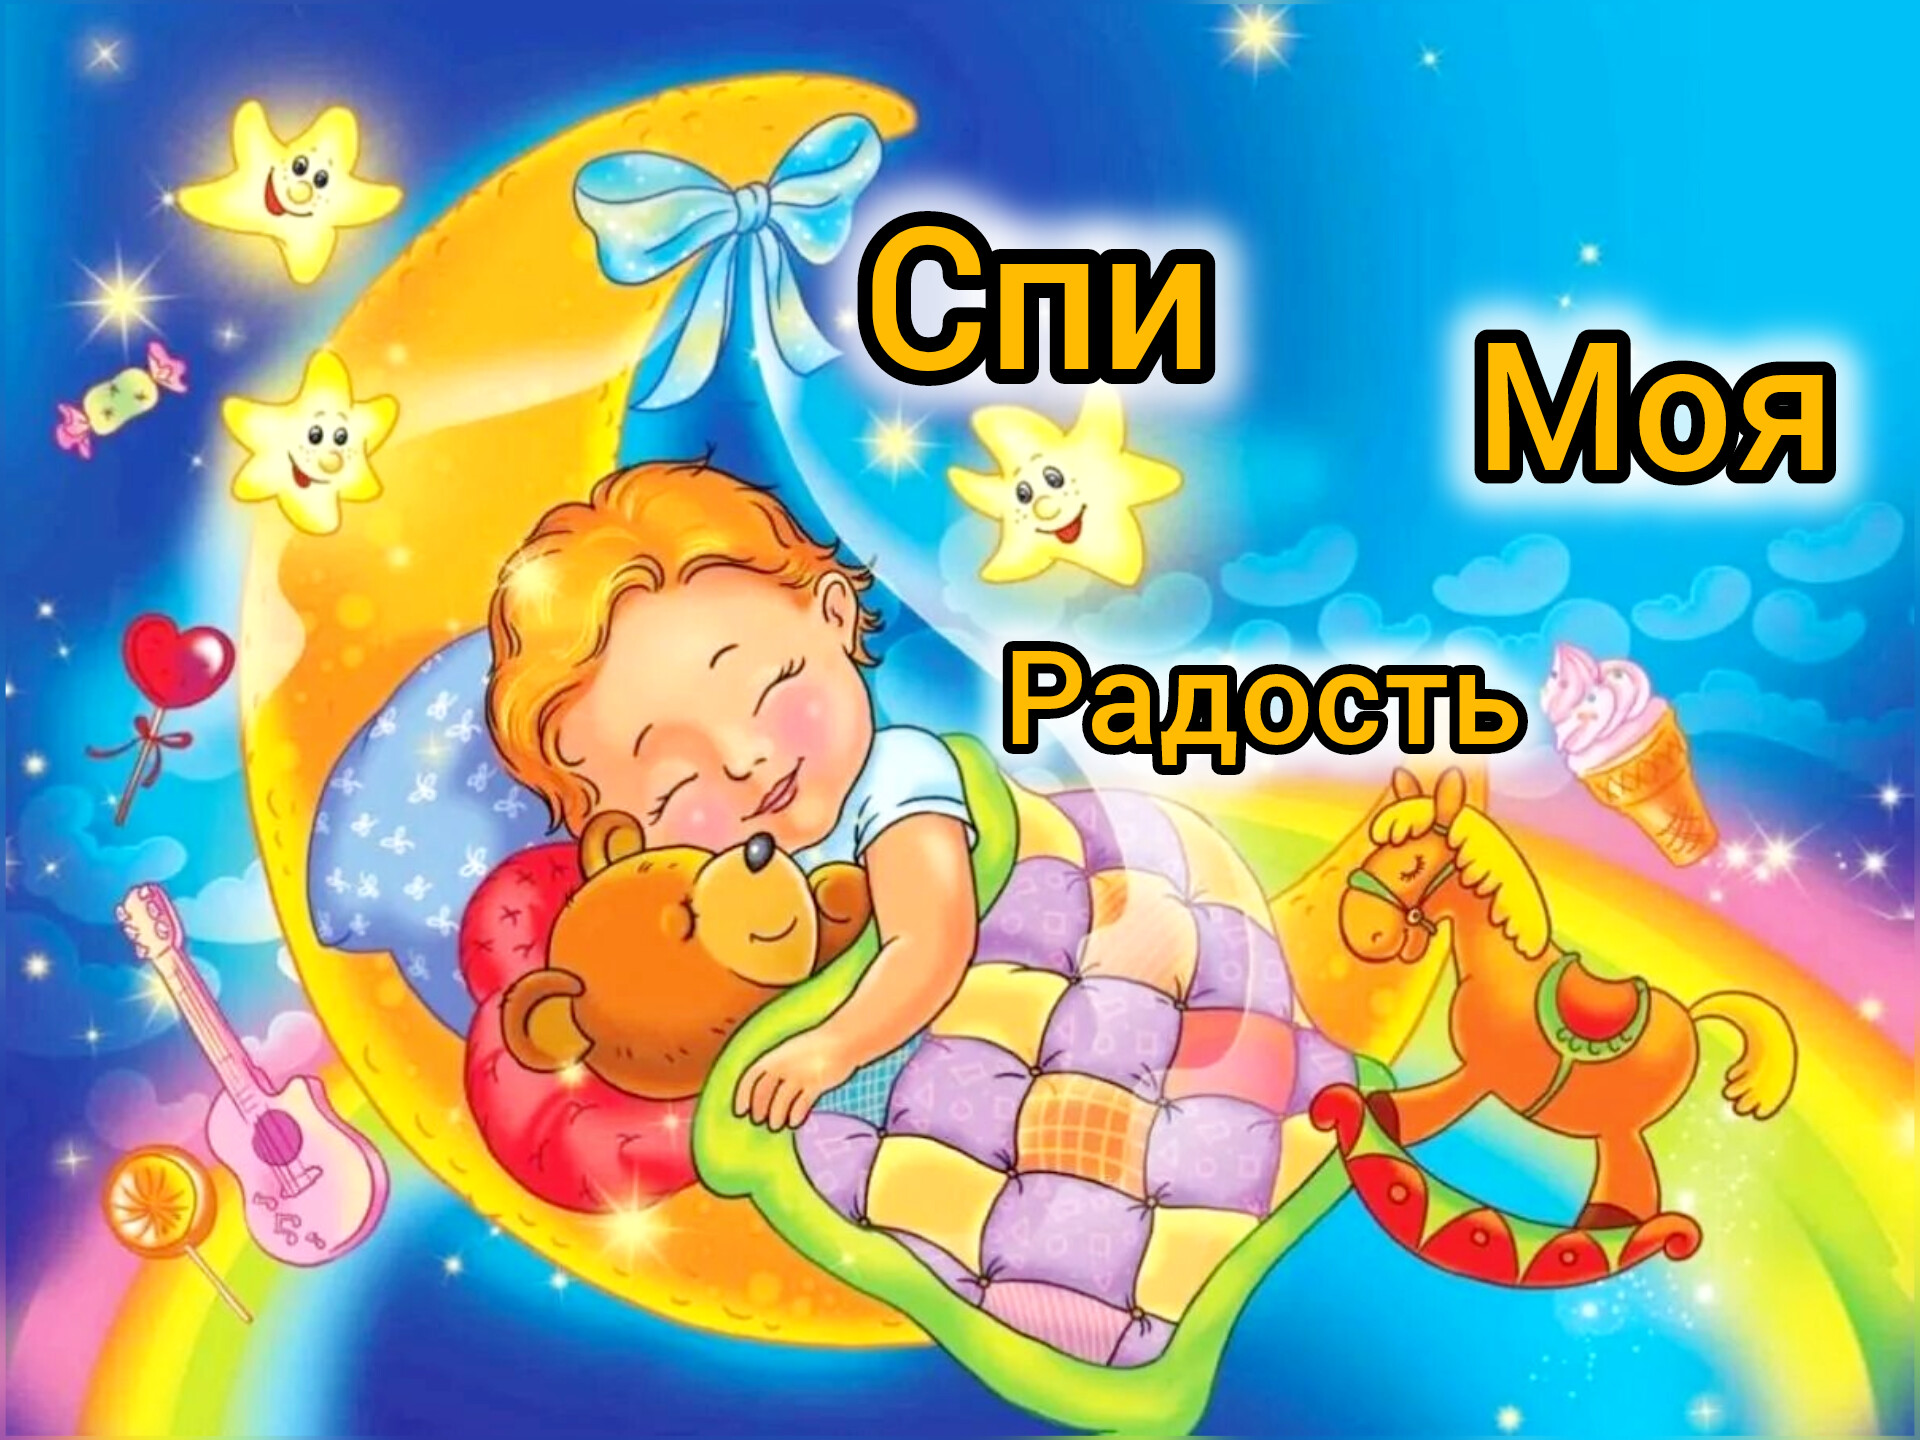 🎵❤ Колыбельная для малыша и звуки магии 🎵🔮 A lullaby for a baby and the sounds of magic